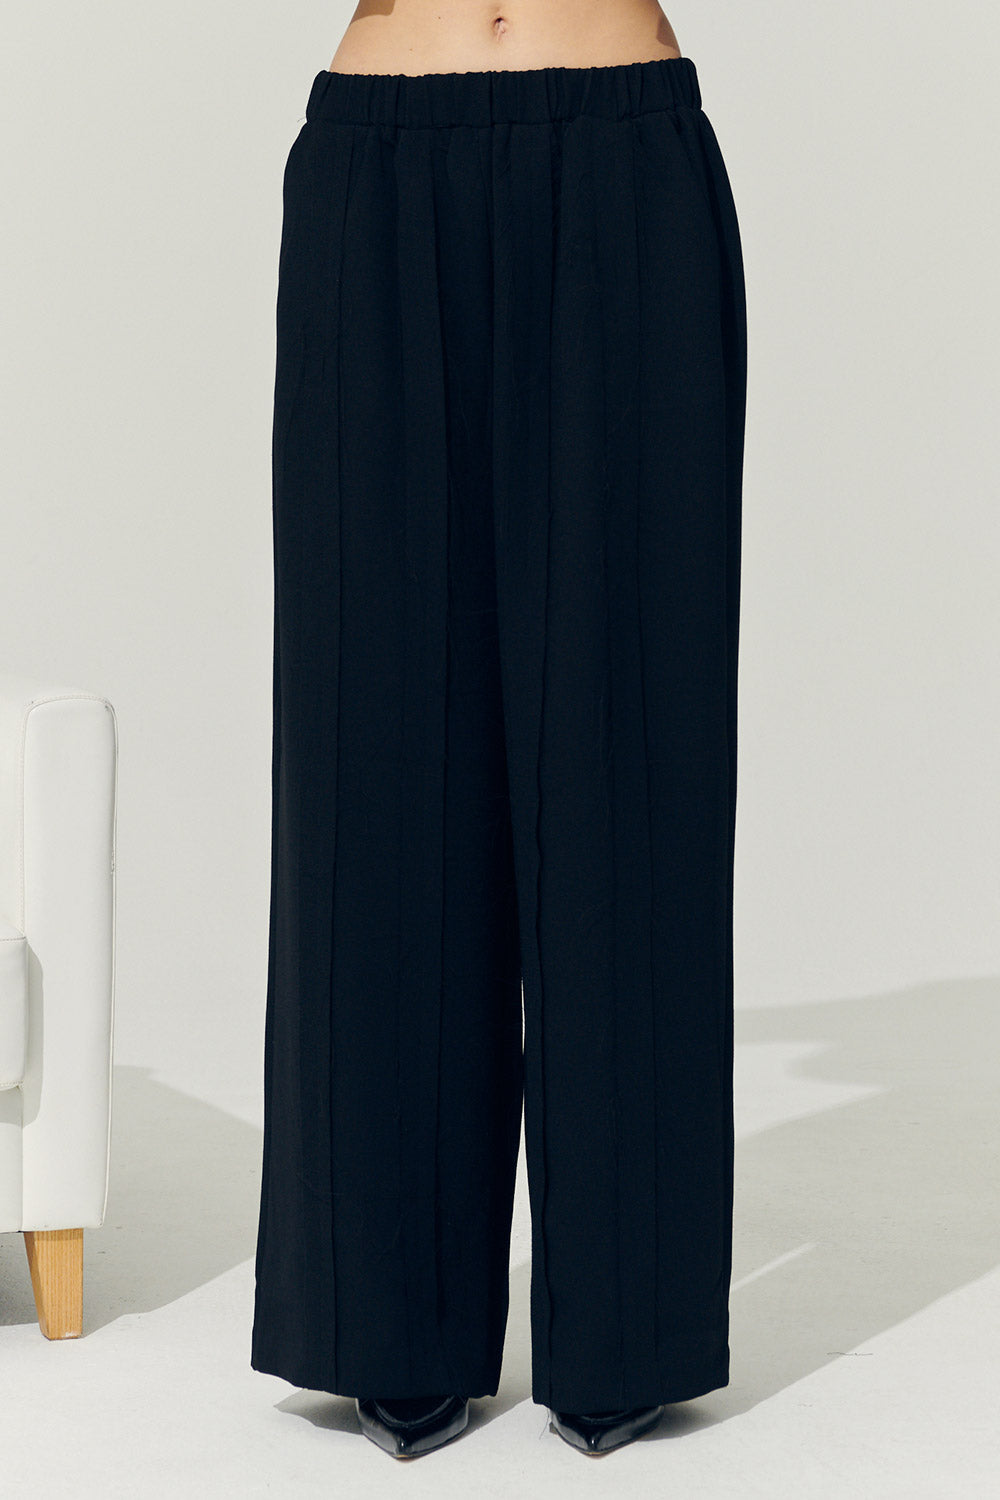 STORETS.us Re:born Daisy Frayed Trim Wide Pants